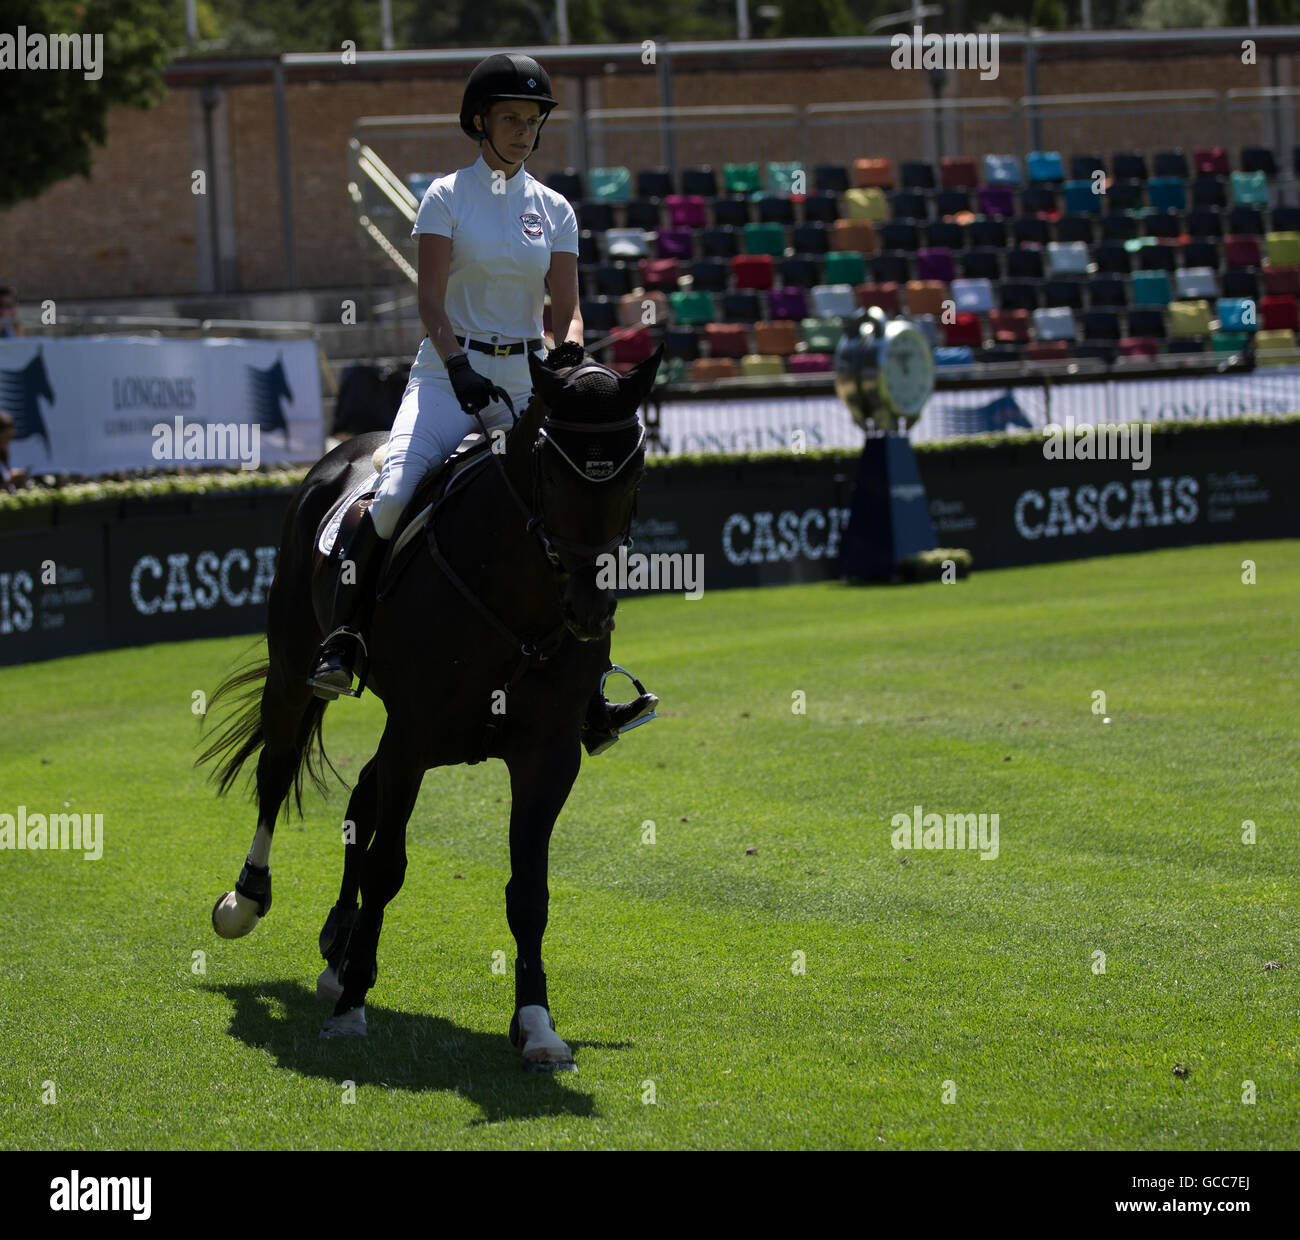 Lisbon, Portugal. 08th July, 2016. Greek rider, Athina Onassis, riding the horse, Cinsey Credit:  Alexandre Sousa/Alamy Live News Stock Photo